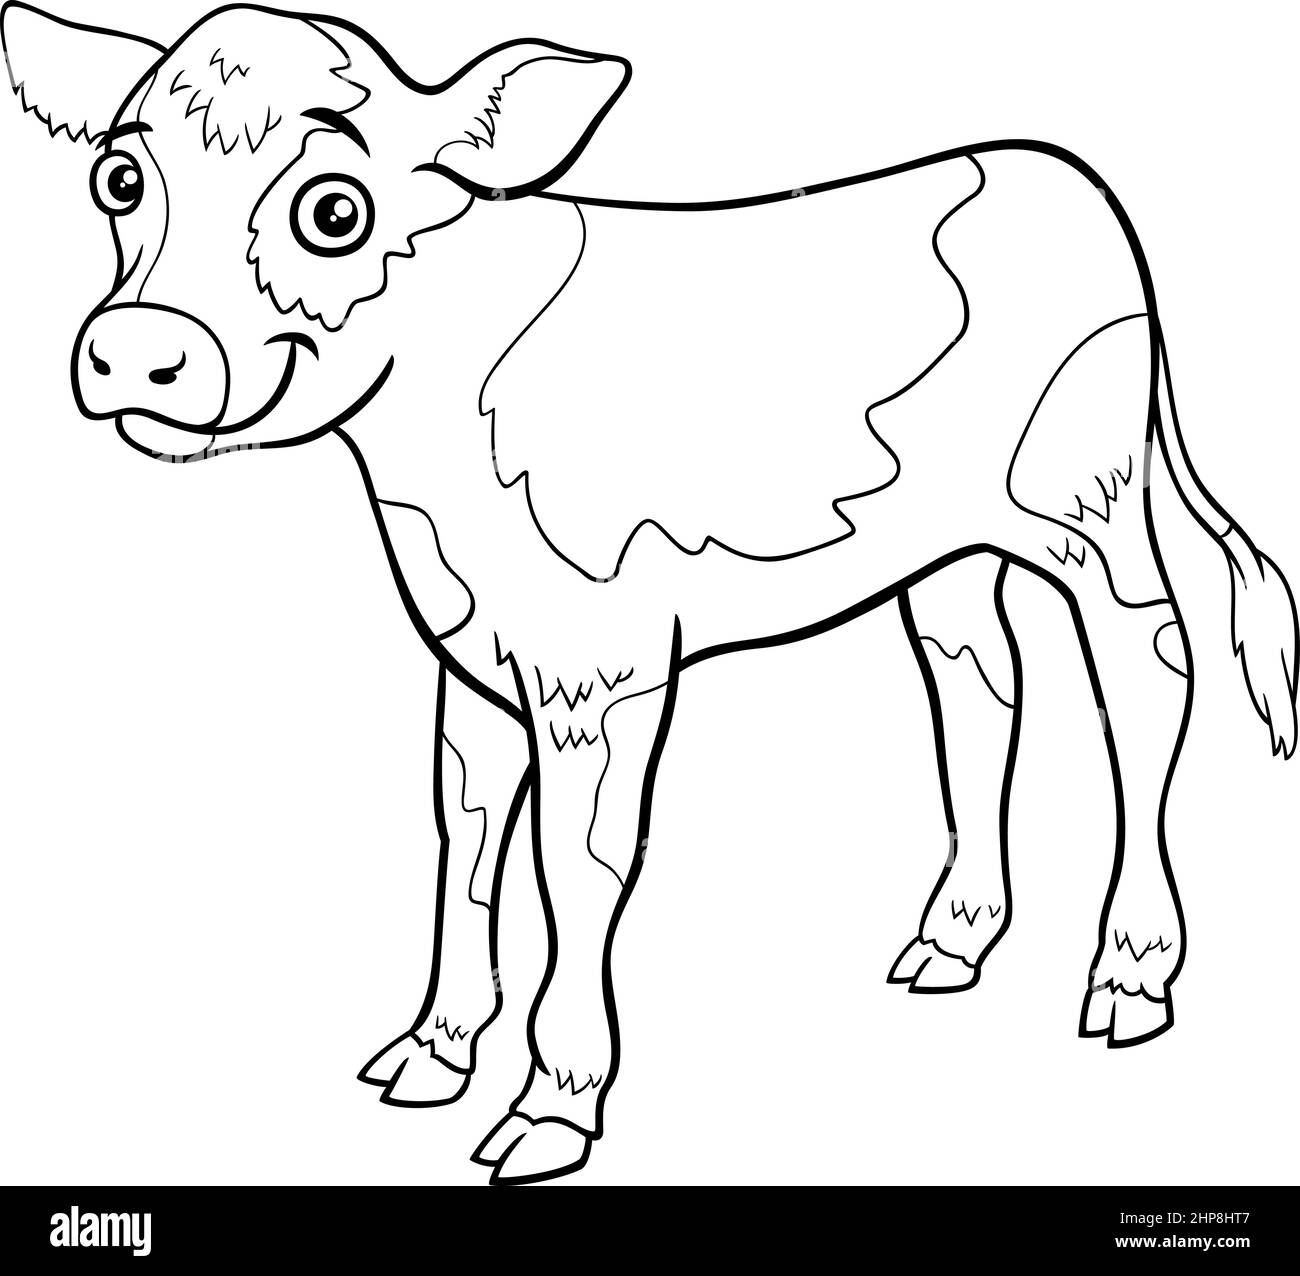 Animal farm book Cut Out Stock Images & Pictures - Alamy